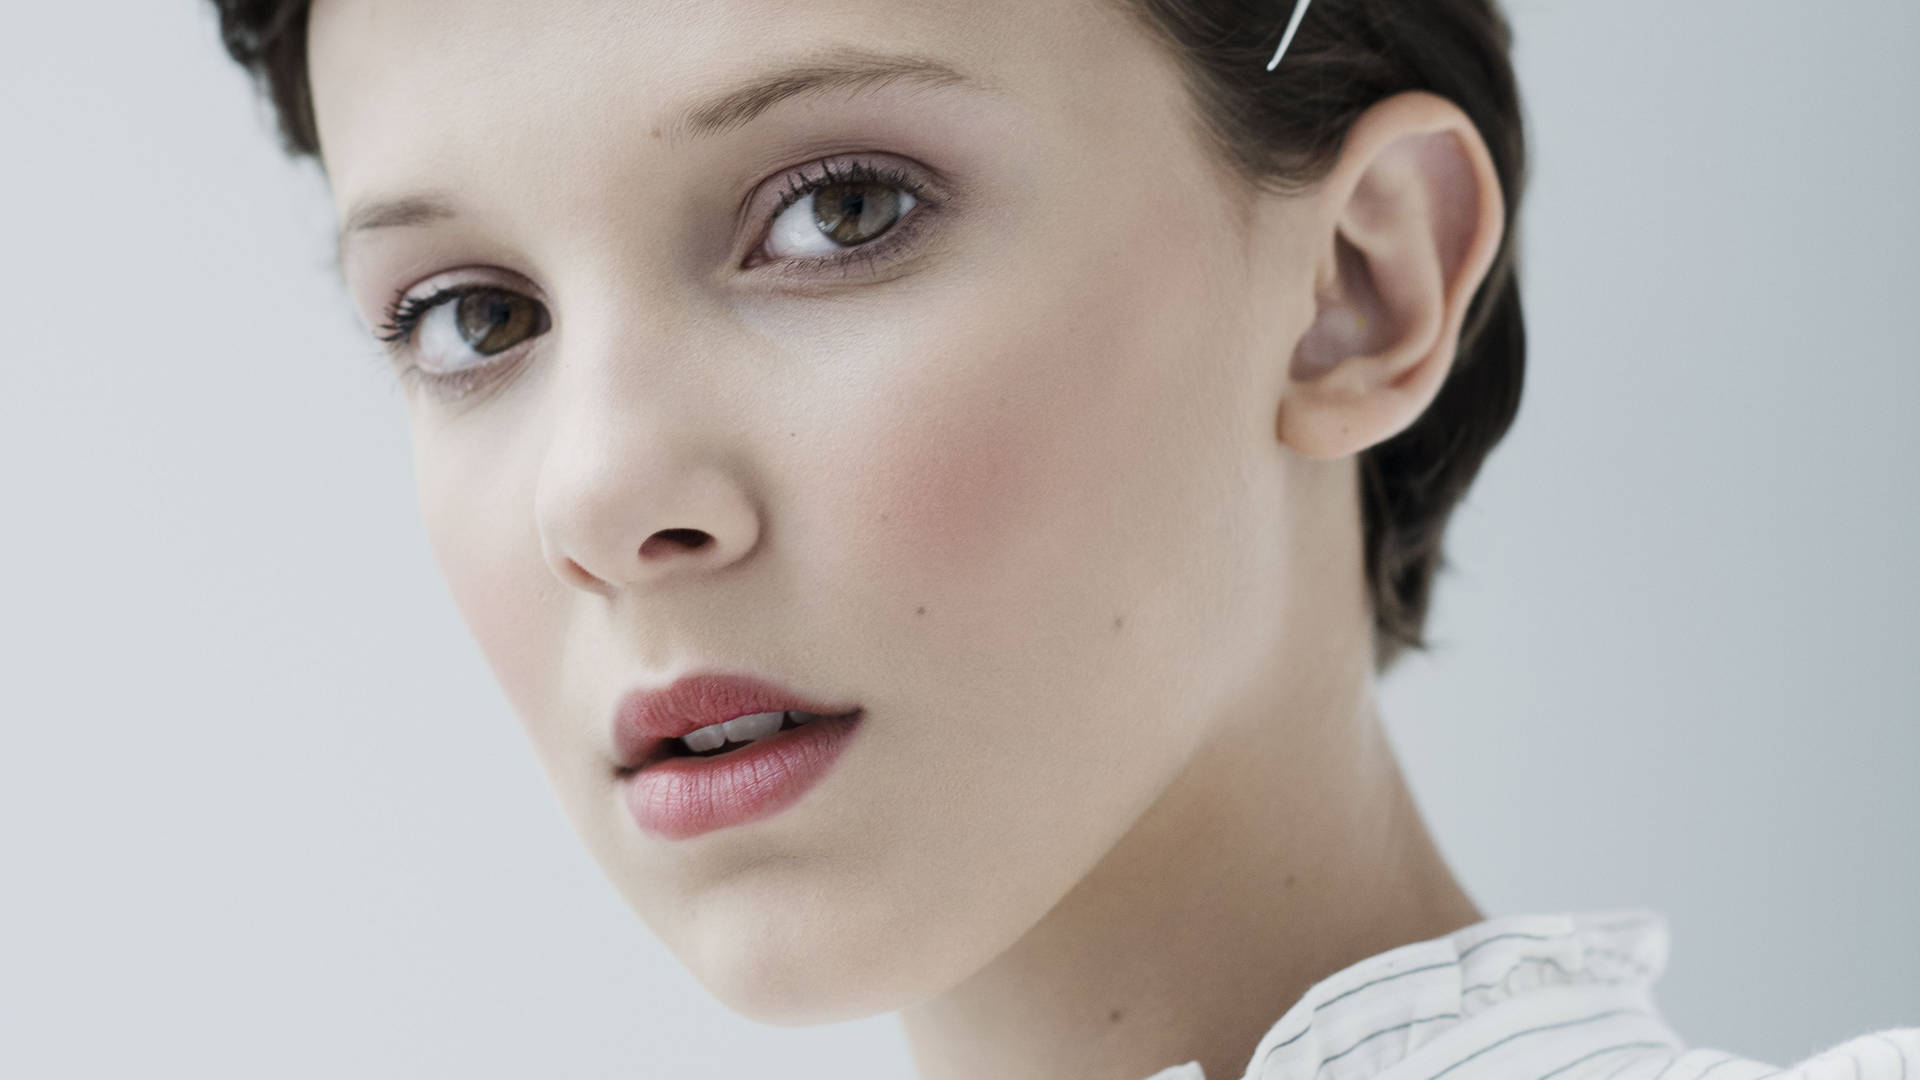 HD Millie Bobby Brown Actress 2021 Wallpapers